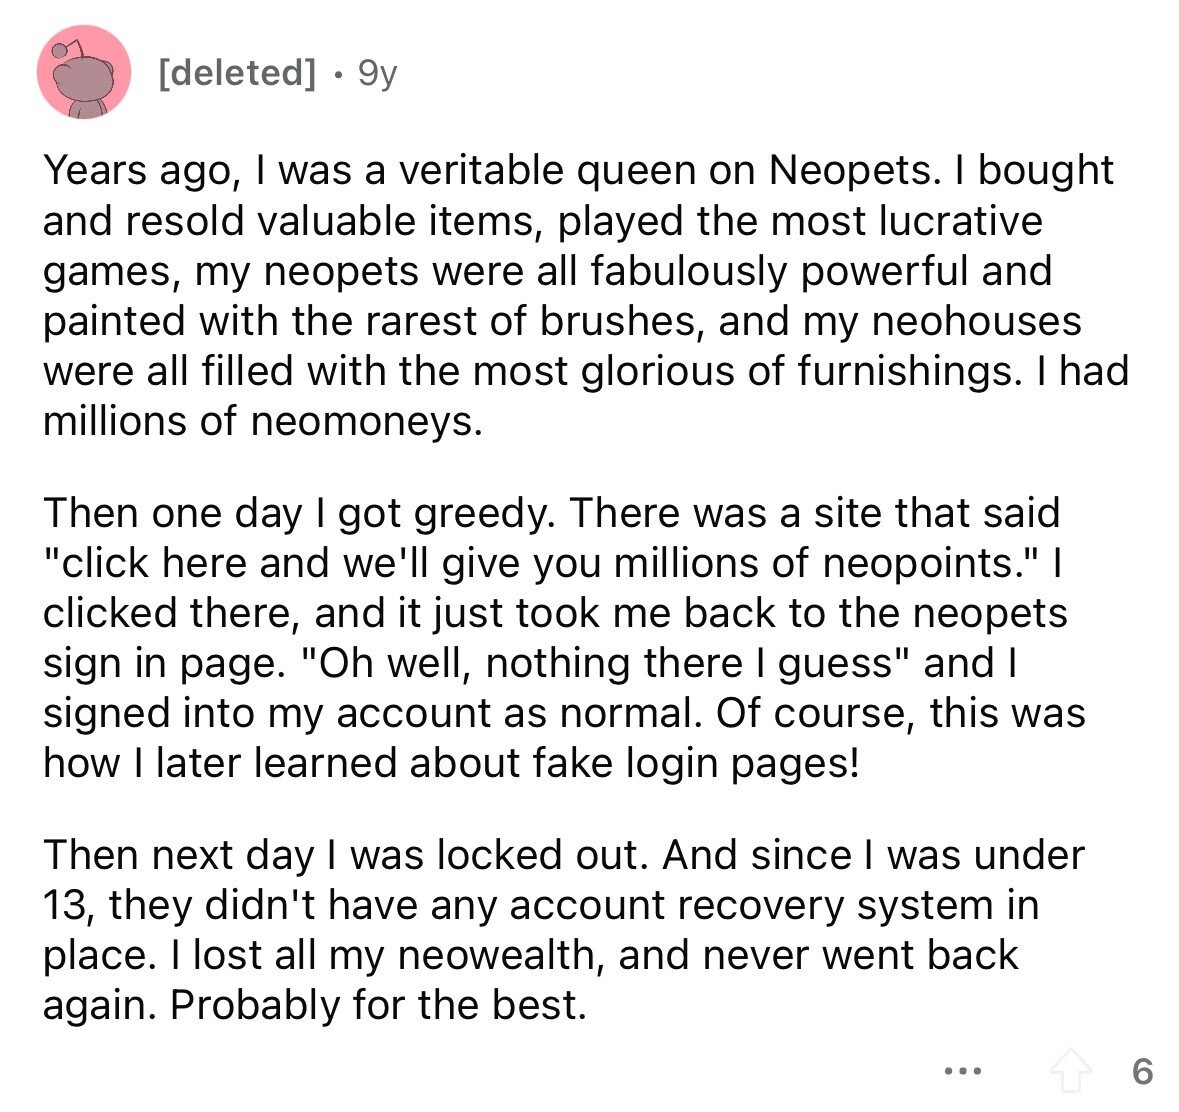 [deleted] 9y Years ago, I was a veritable queen on Neopets. I bought and resold valuable items, played the most lucrative games, my neopets were all fabulously powerful and painted with the rarest of brushes, and my neohouses were all filled with the most glorious of furnishings. I had millions of neomoneys. Then one day I got greedy. There was a site that said click here and we'll give you millions of neopoints. I clicked there, and it just took me back to the neopets sign in page. Oh well, nothing there I guess and I signed into my account 